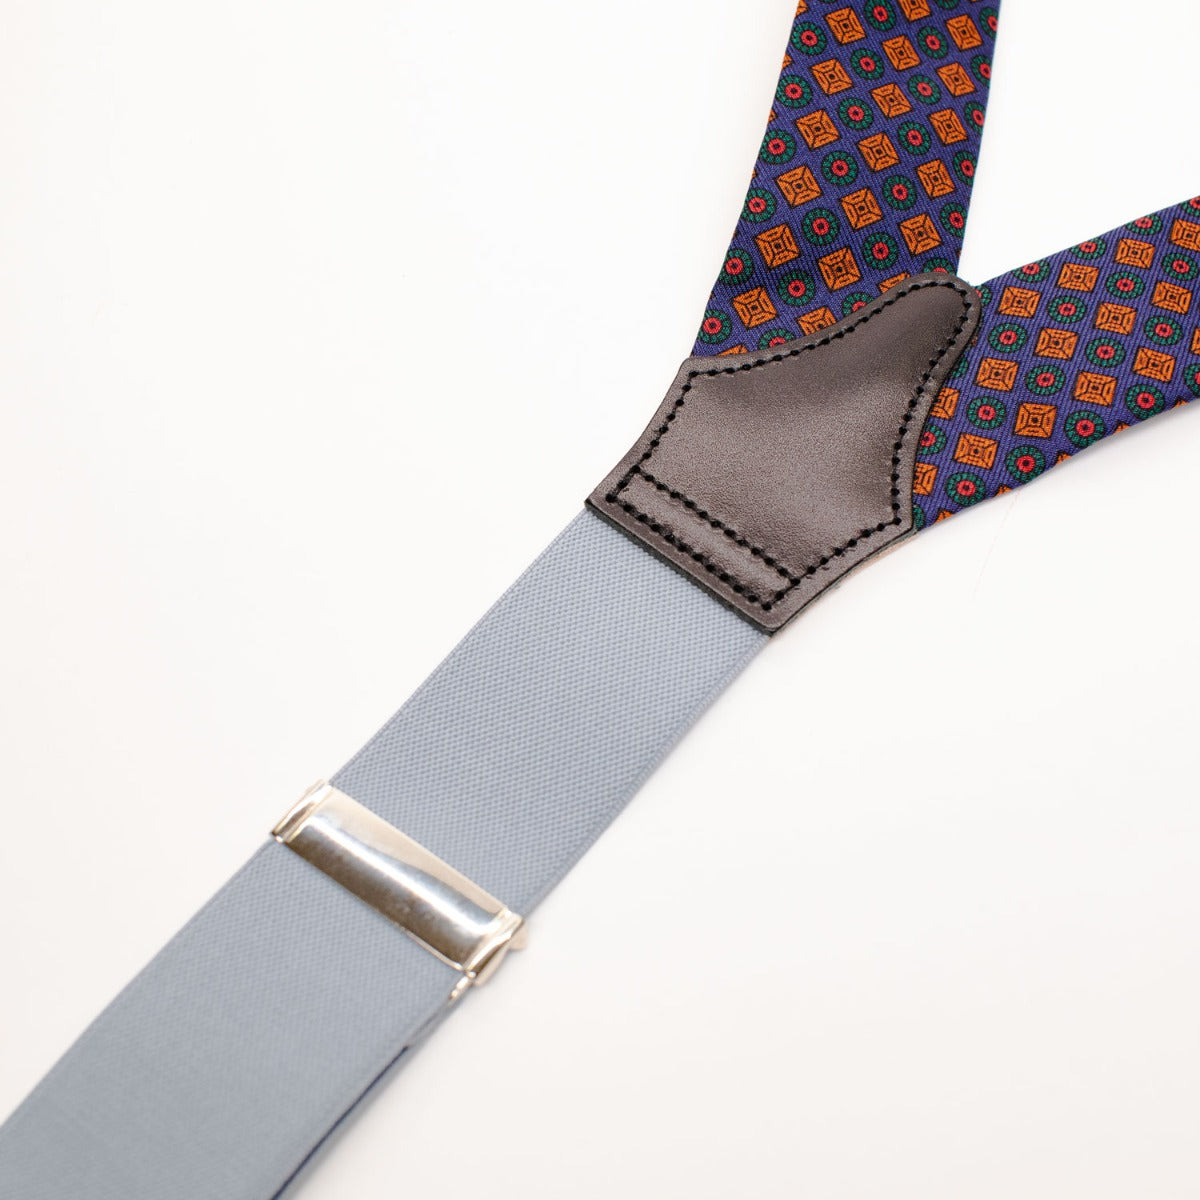 A pair of Sovereign Grade Solid Cornflower Braces with a blue and orange pattern from KirbyAllison.com.